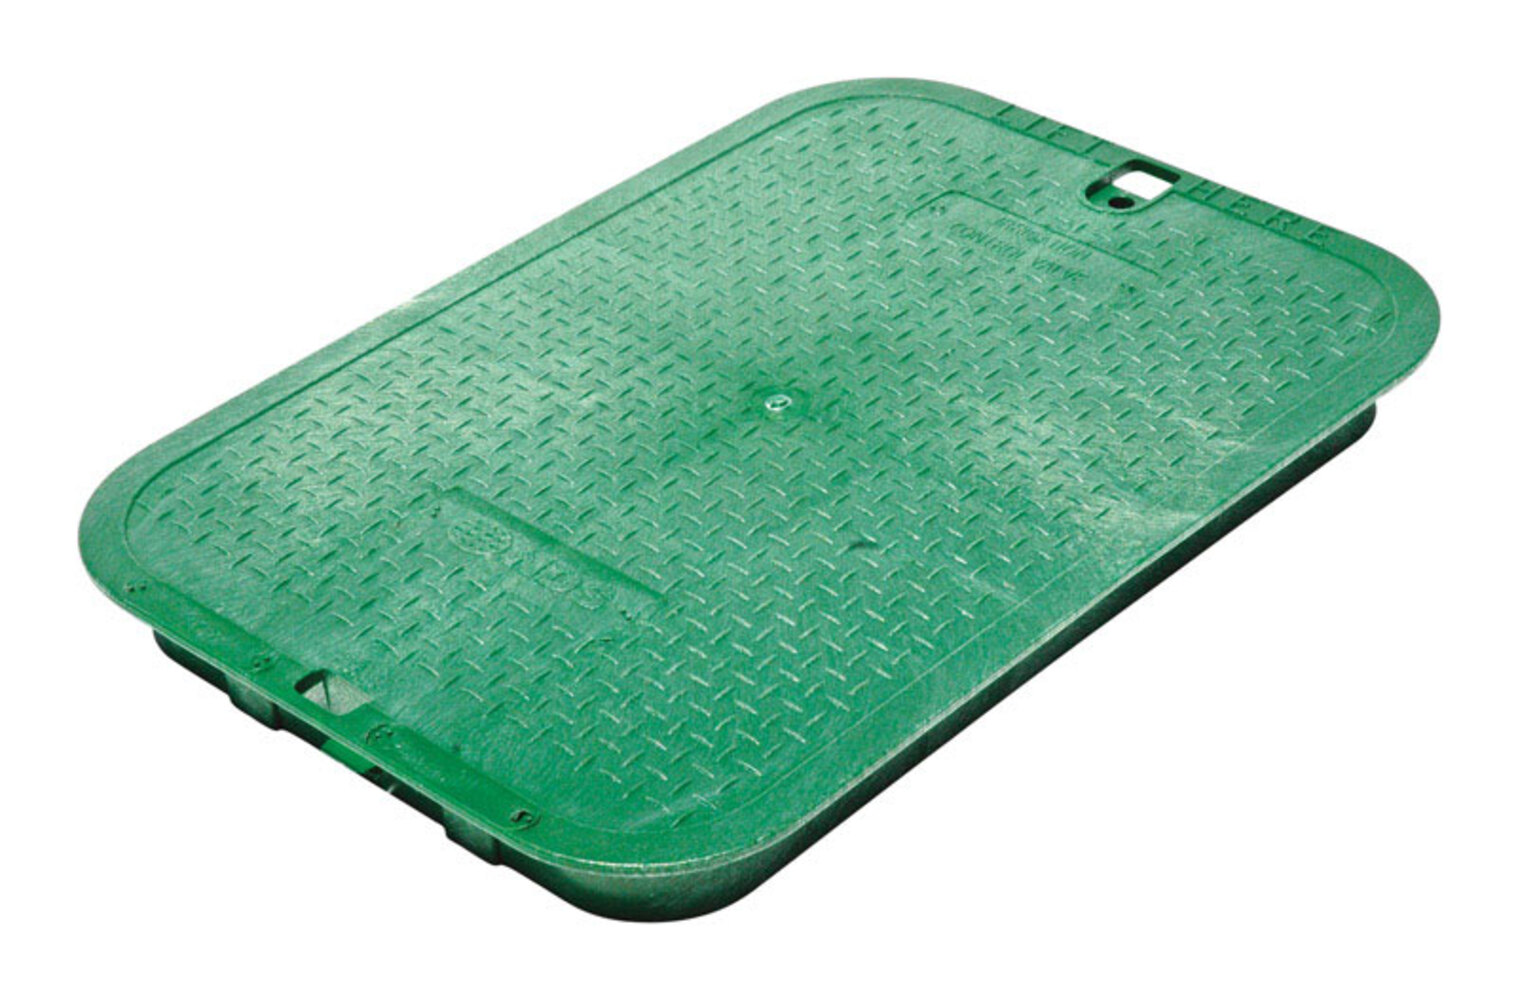 NDS 11-5/8 in. W X 2 in. H Rectangular Valve Box Cover Green - image 2 of 2